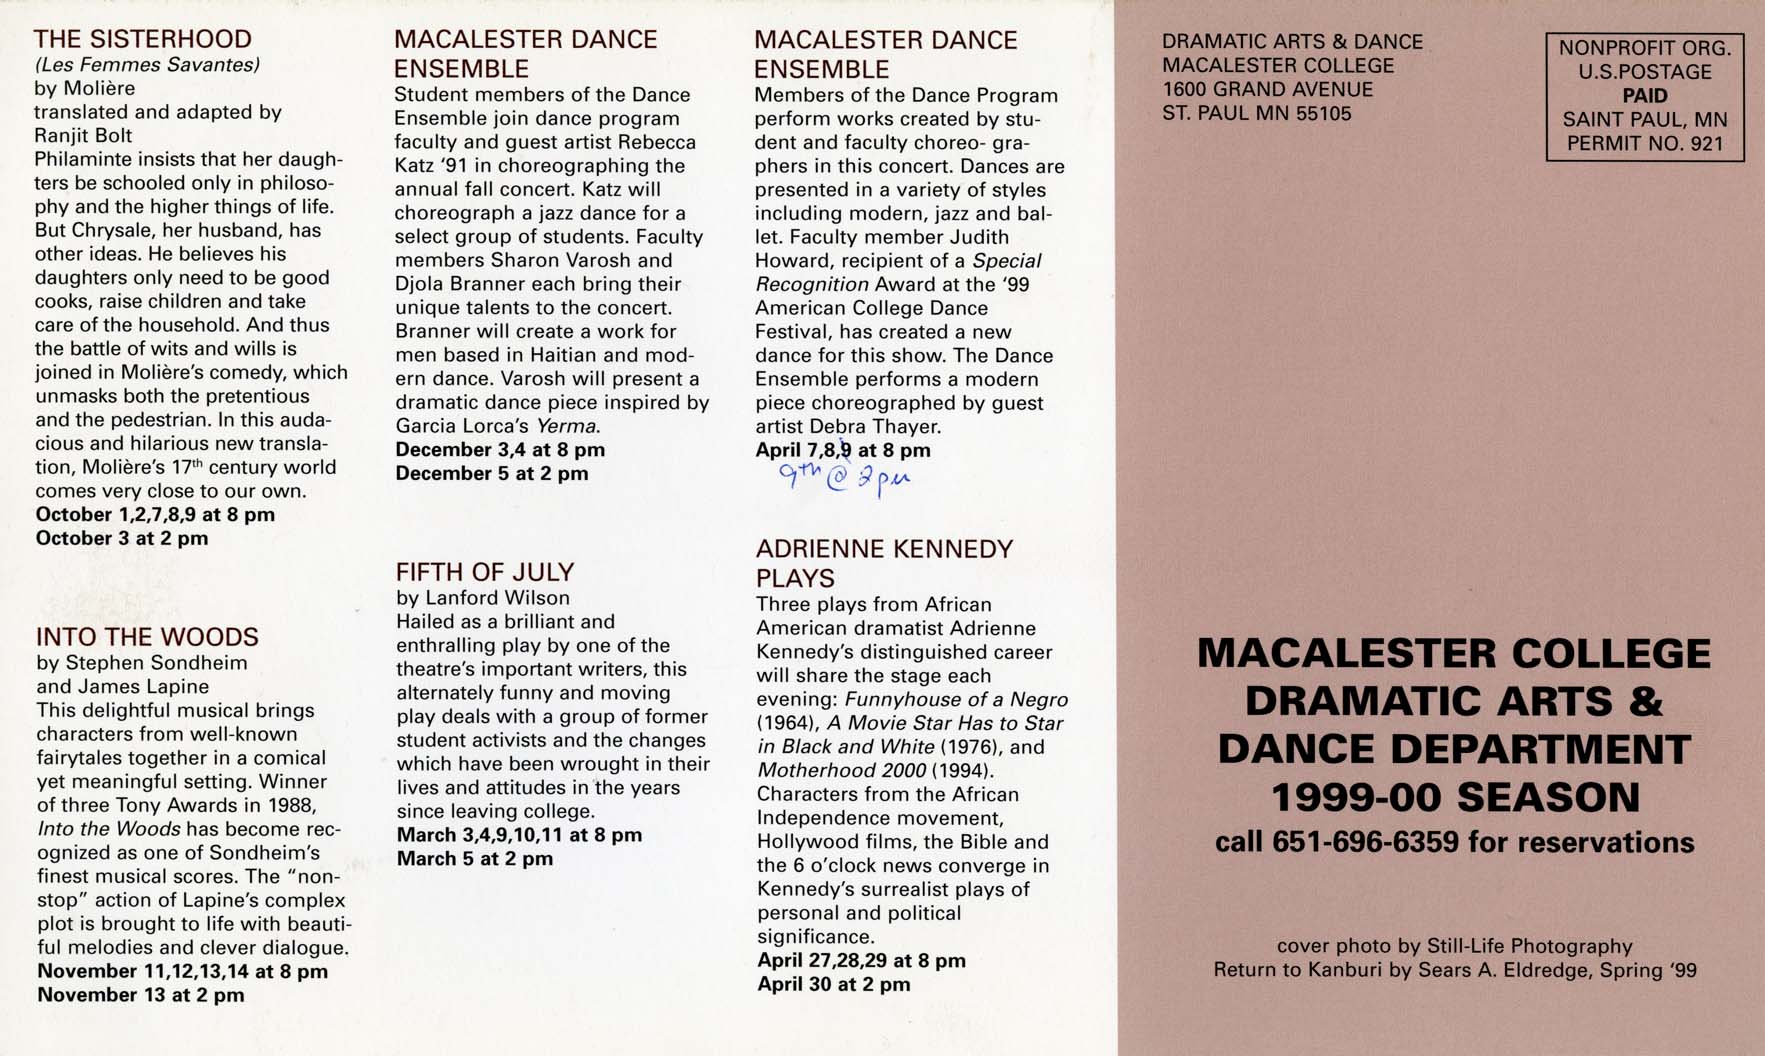 Overview of theater and dance schedule 1999-2000